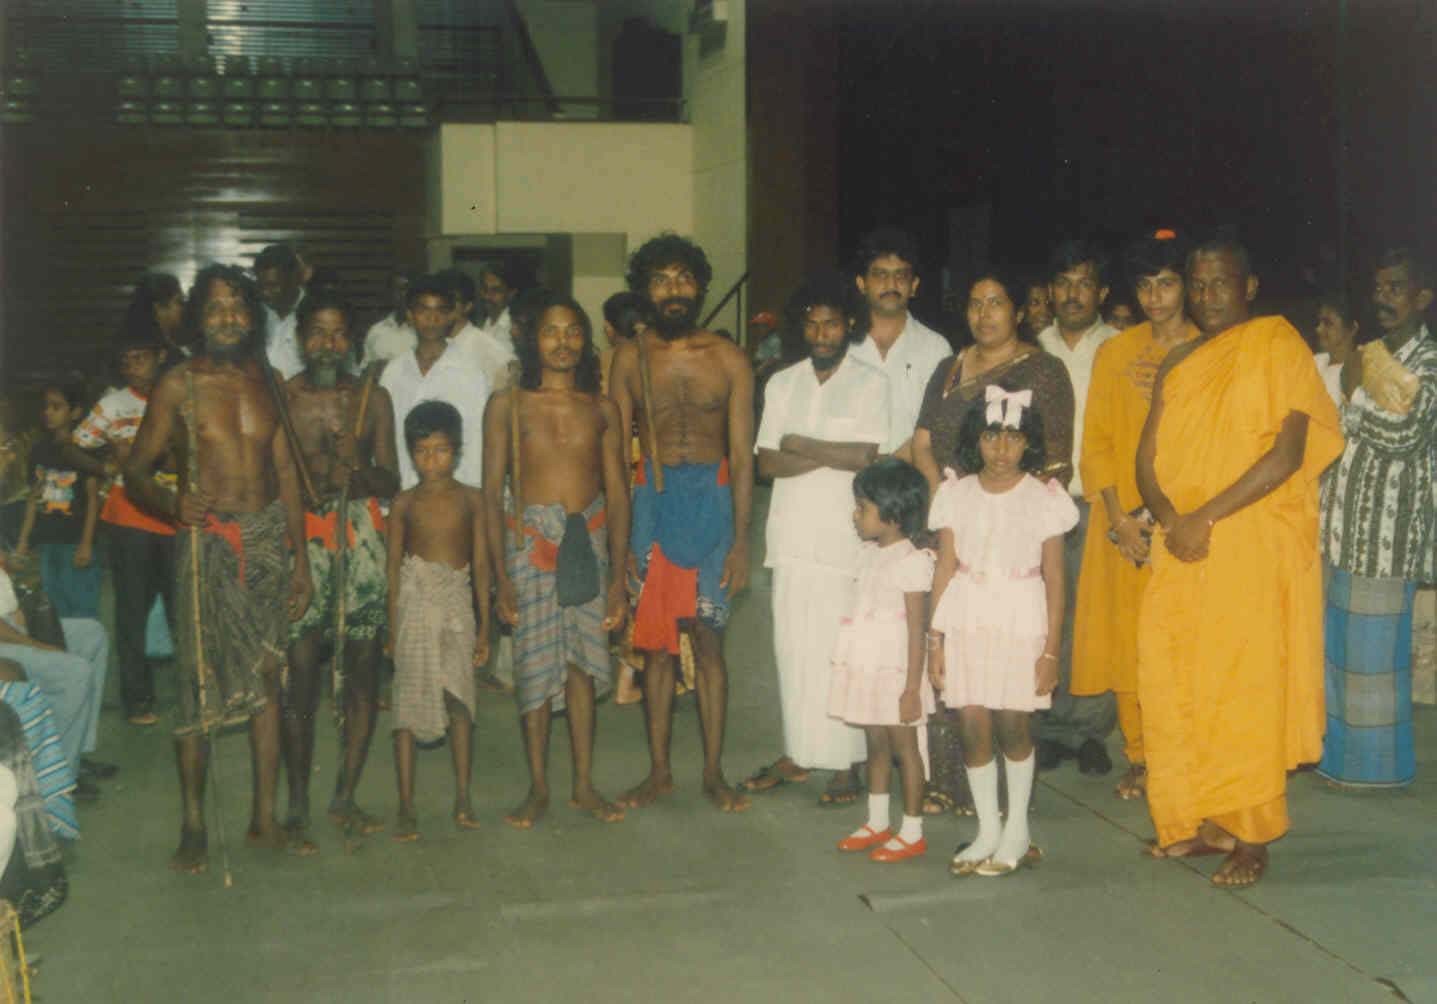 The Veddas (Sri Lanka's indigenous people) trip to Colombo